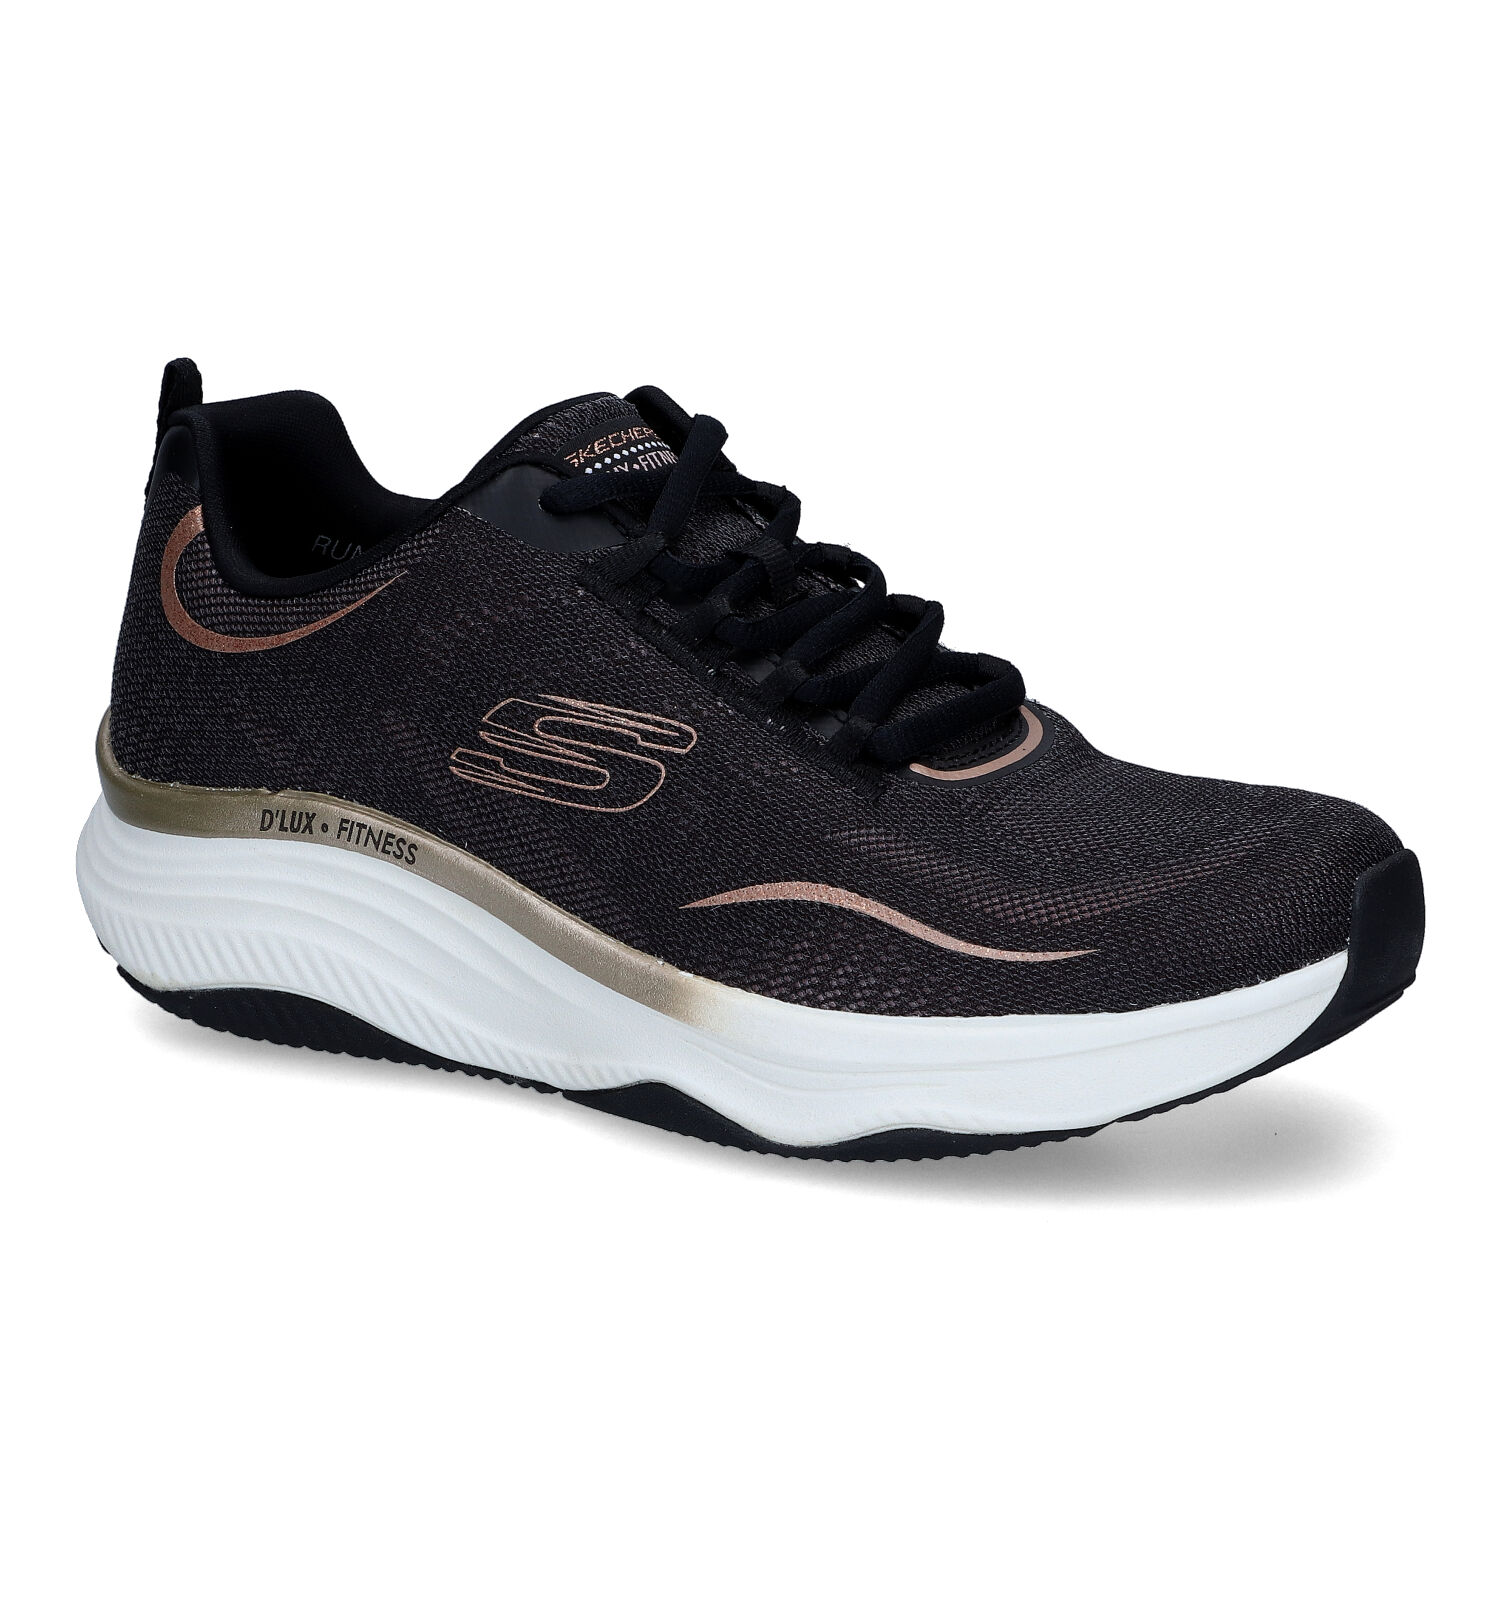 Formulering Verduisteren anders Skechers Relaxed Fit D'Lux Fitness Relaxed Fit Zwarte sneakers | Dames  Sneakers